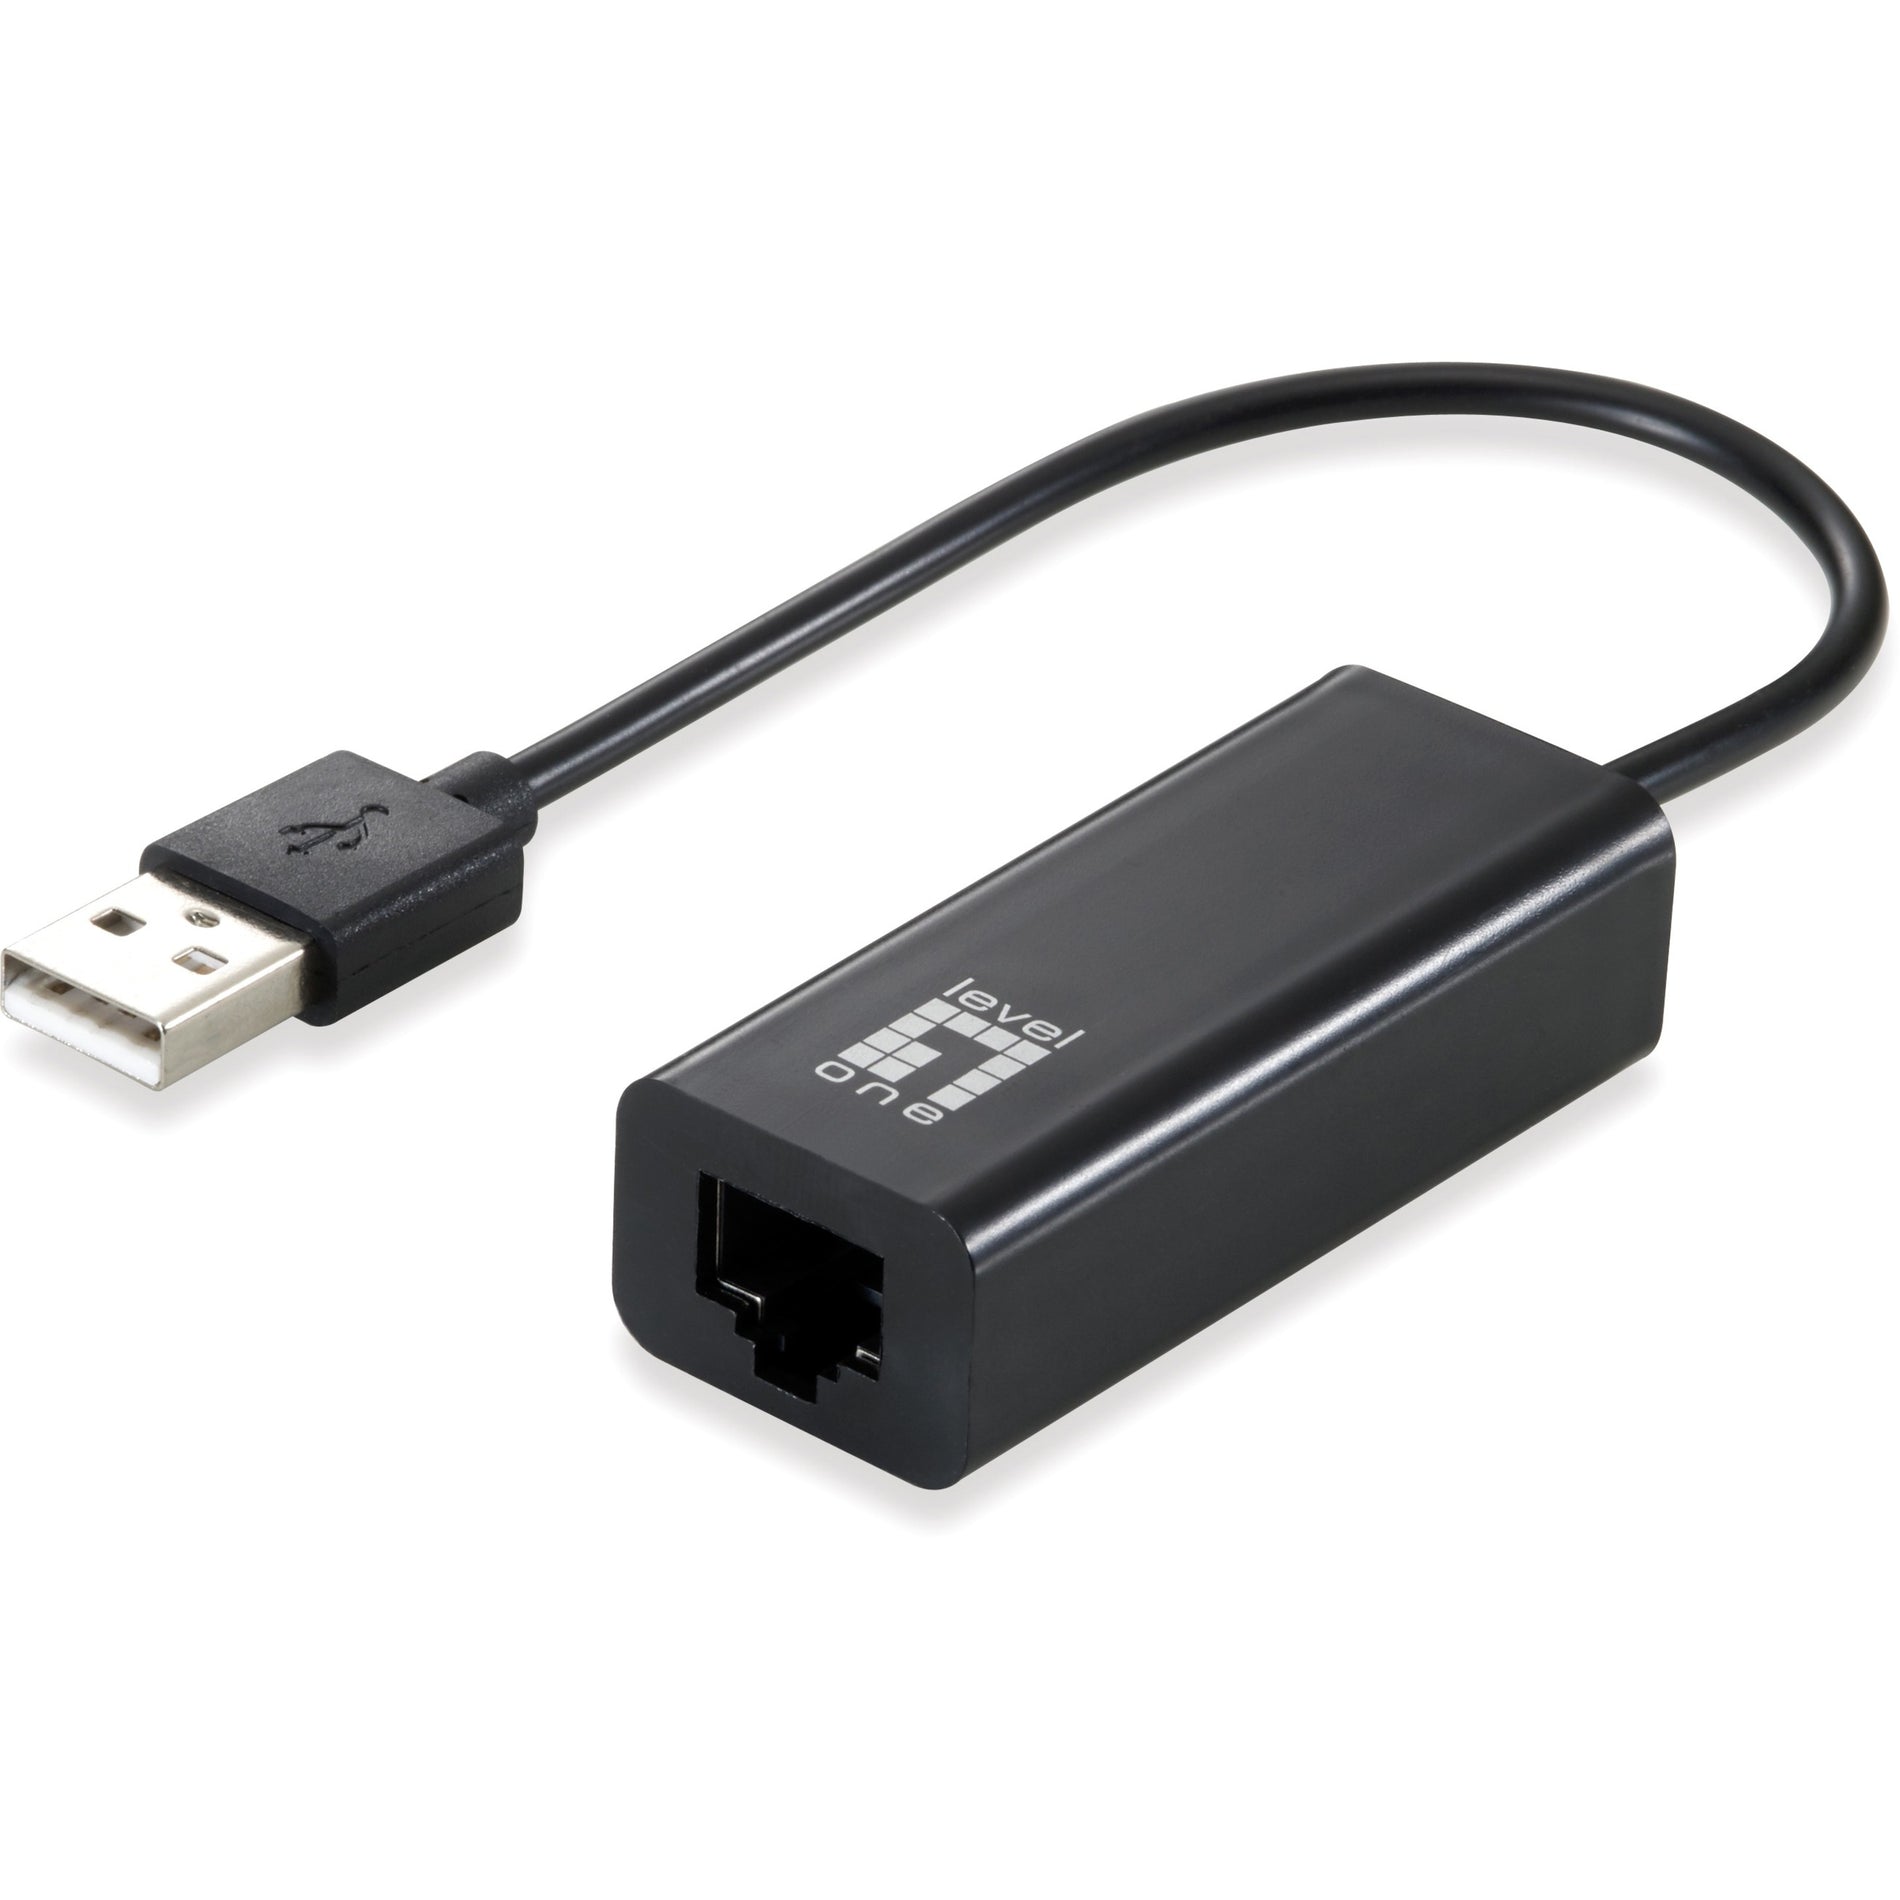 LevelOne USB-0301 USB to Ethernet Adapter for Windows and MAC, Fast and Reliable Internet Connection